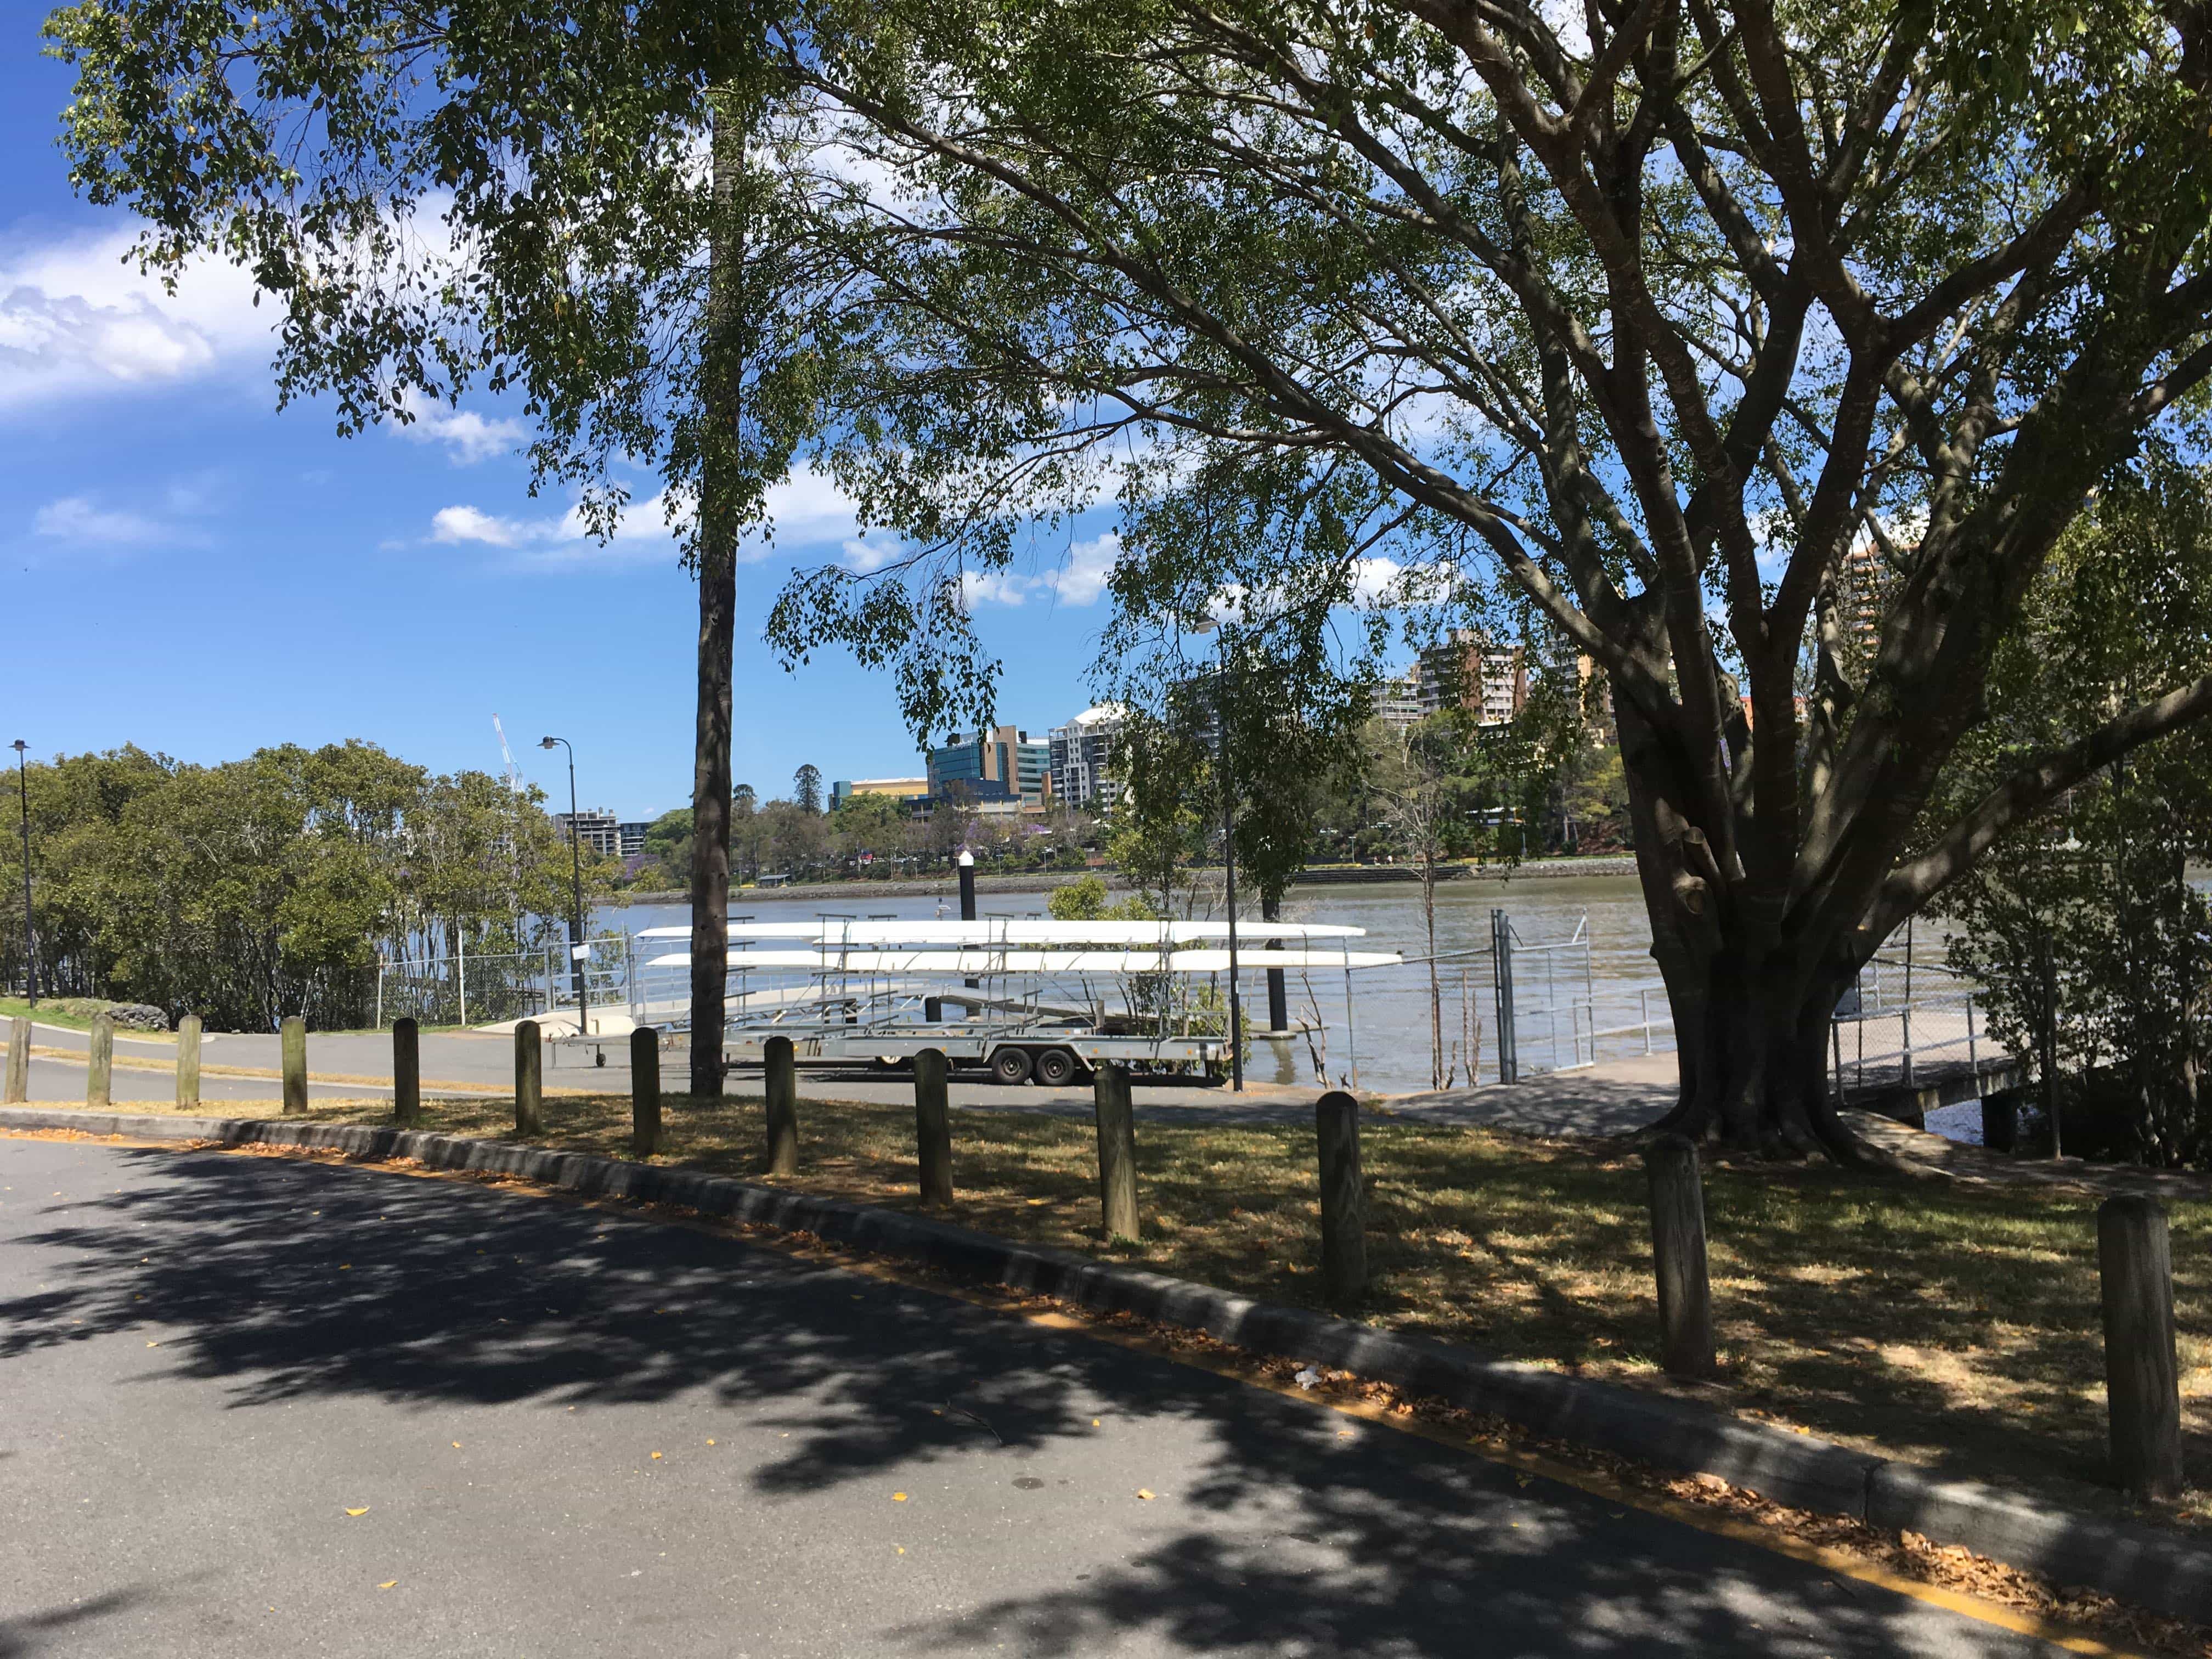 The Brisbane River borders much of West End. Photo taken by Property Mash less than 1km from Bohemia.